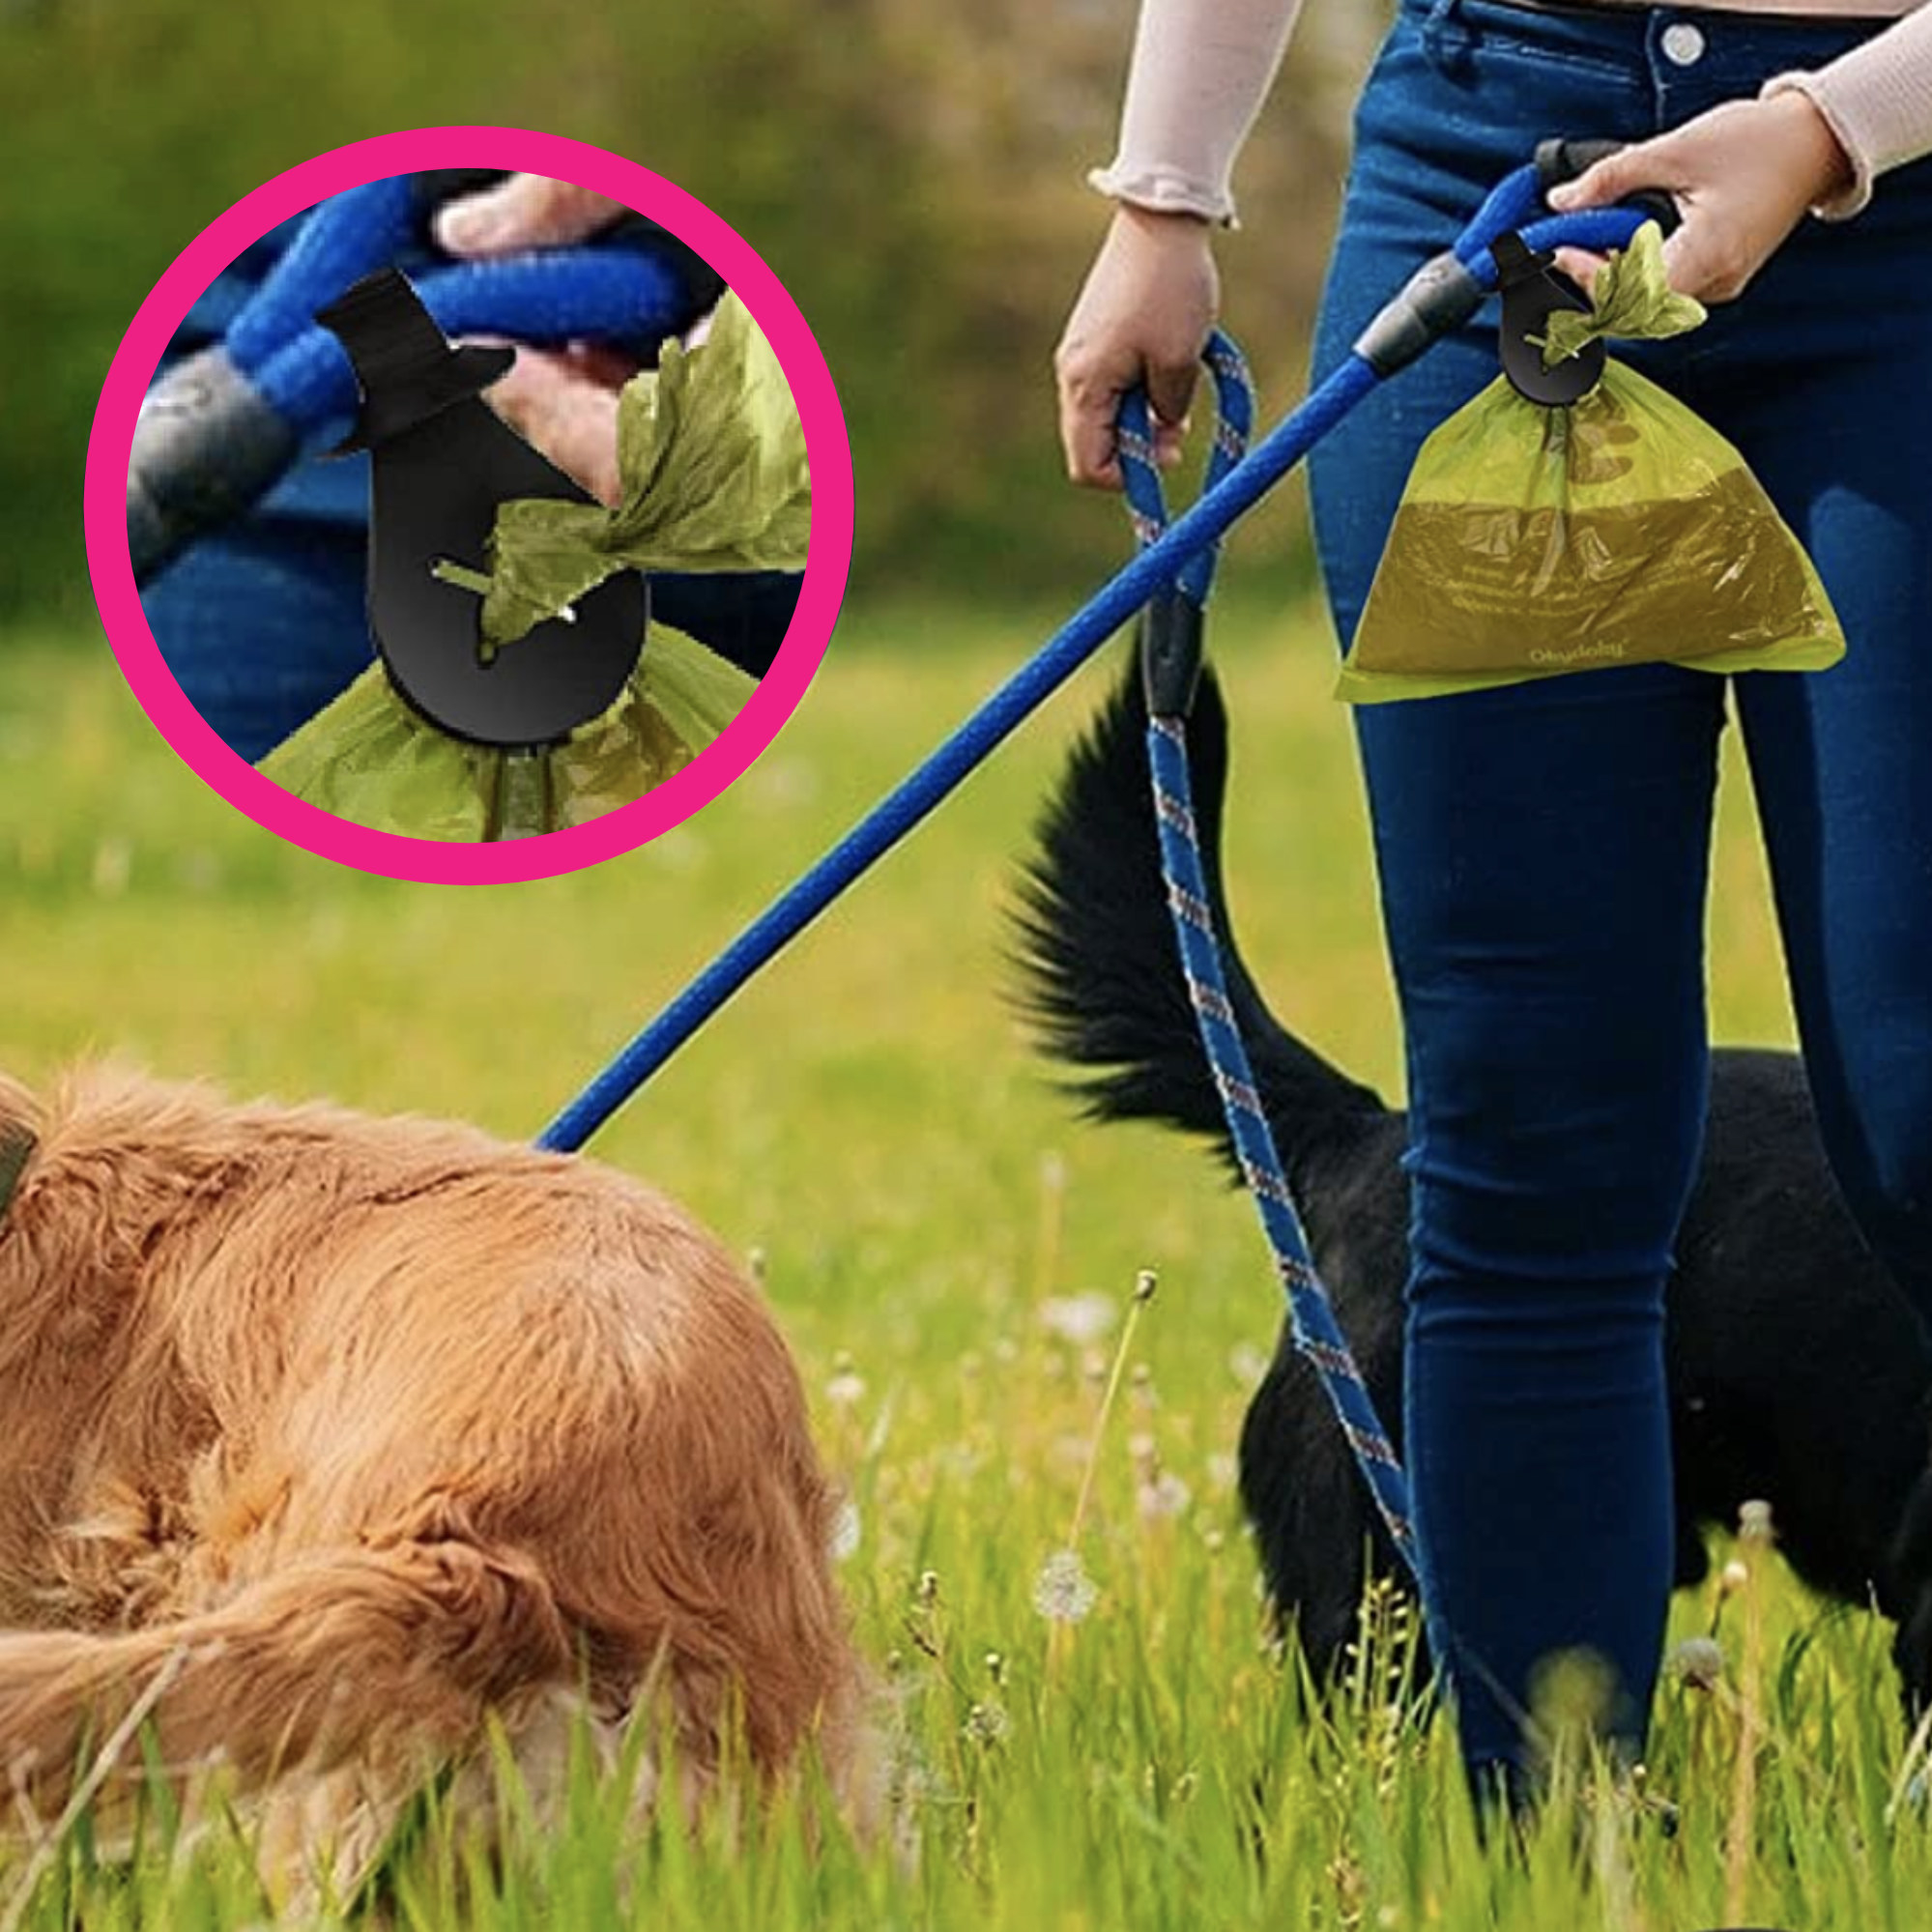 Someone walking their dog in a field, with the holder attached to the leash and a waste bag dangling from it